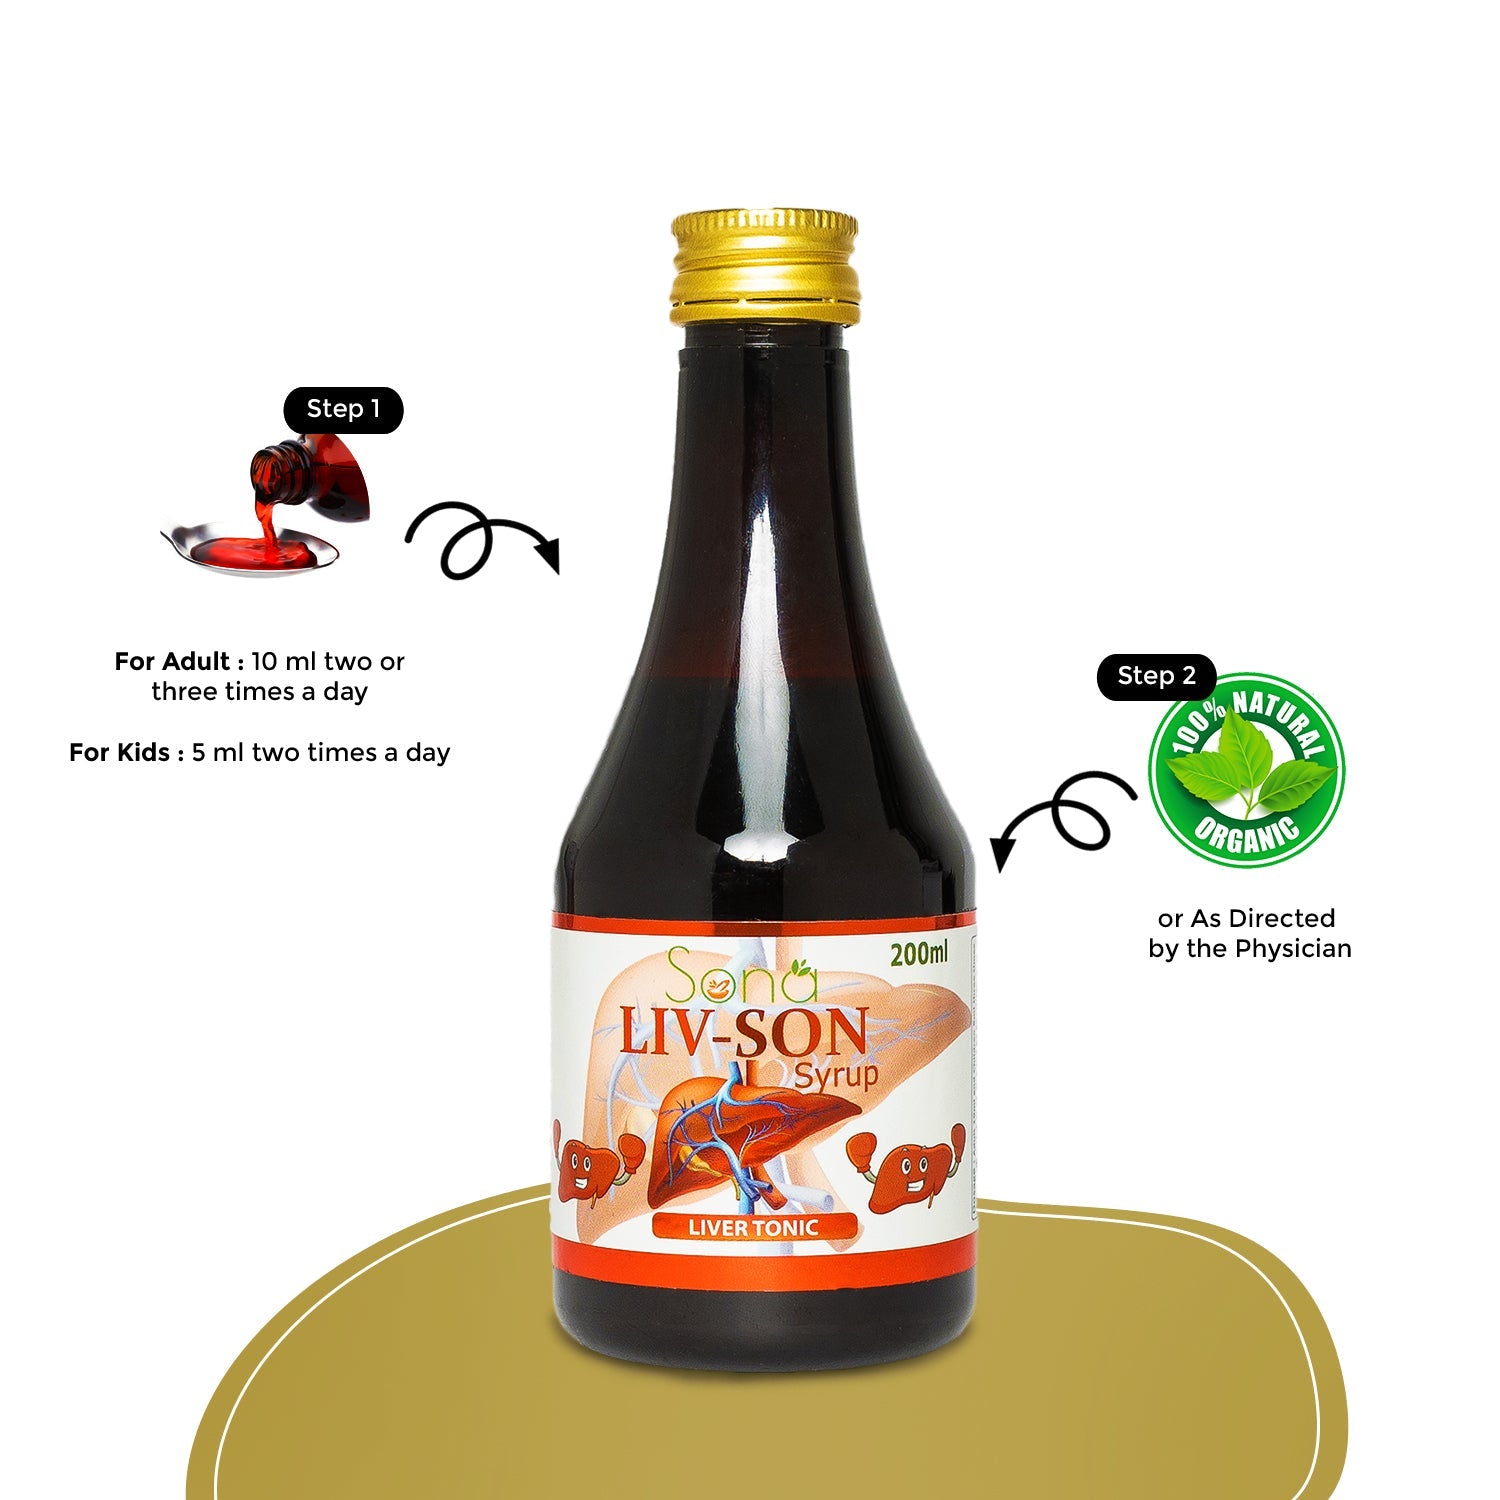 Sona Livson Syrup- Liver tonic 200 ml (Pack of 2)